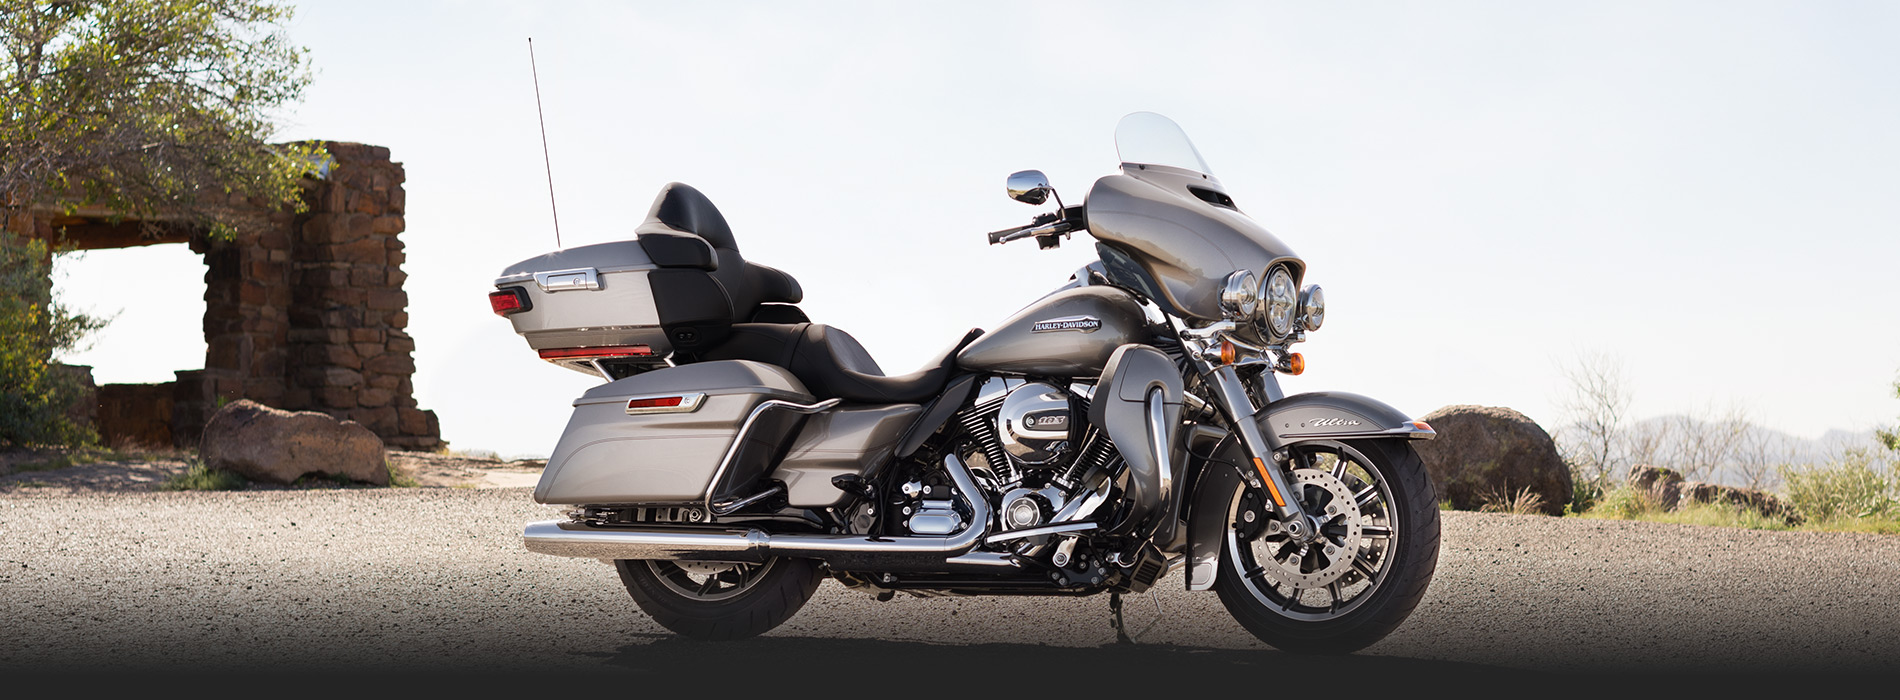 1900x700 > Harley-Davidson Electra Glide Ultra Classic Wallpapers